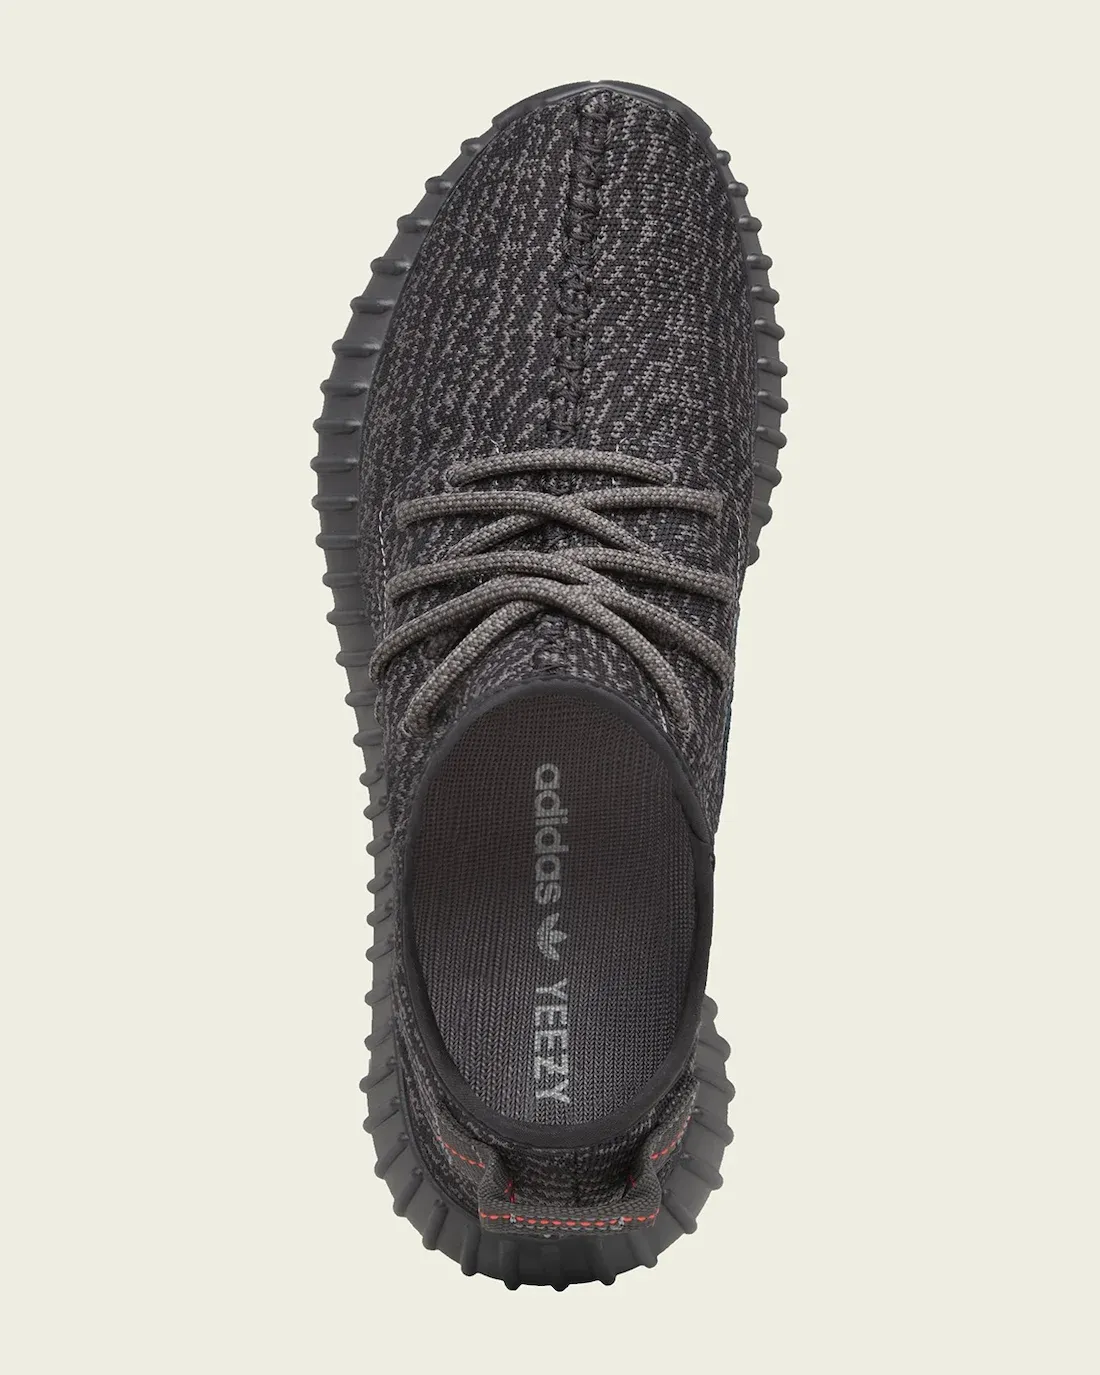 TheSiteSupply Adidas Yeezy Boost 350 Pirate Black 2023 Release Info